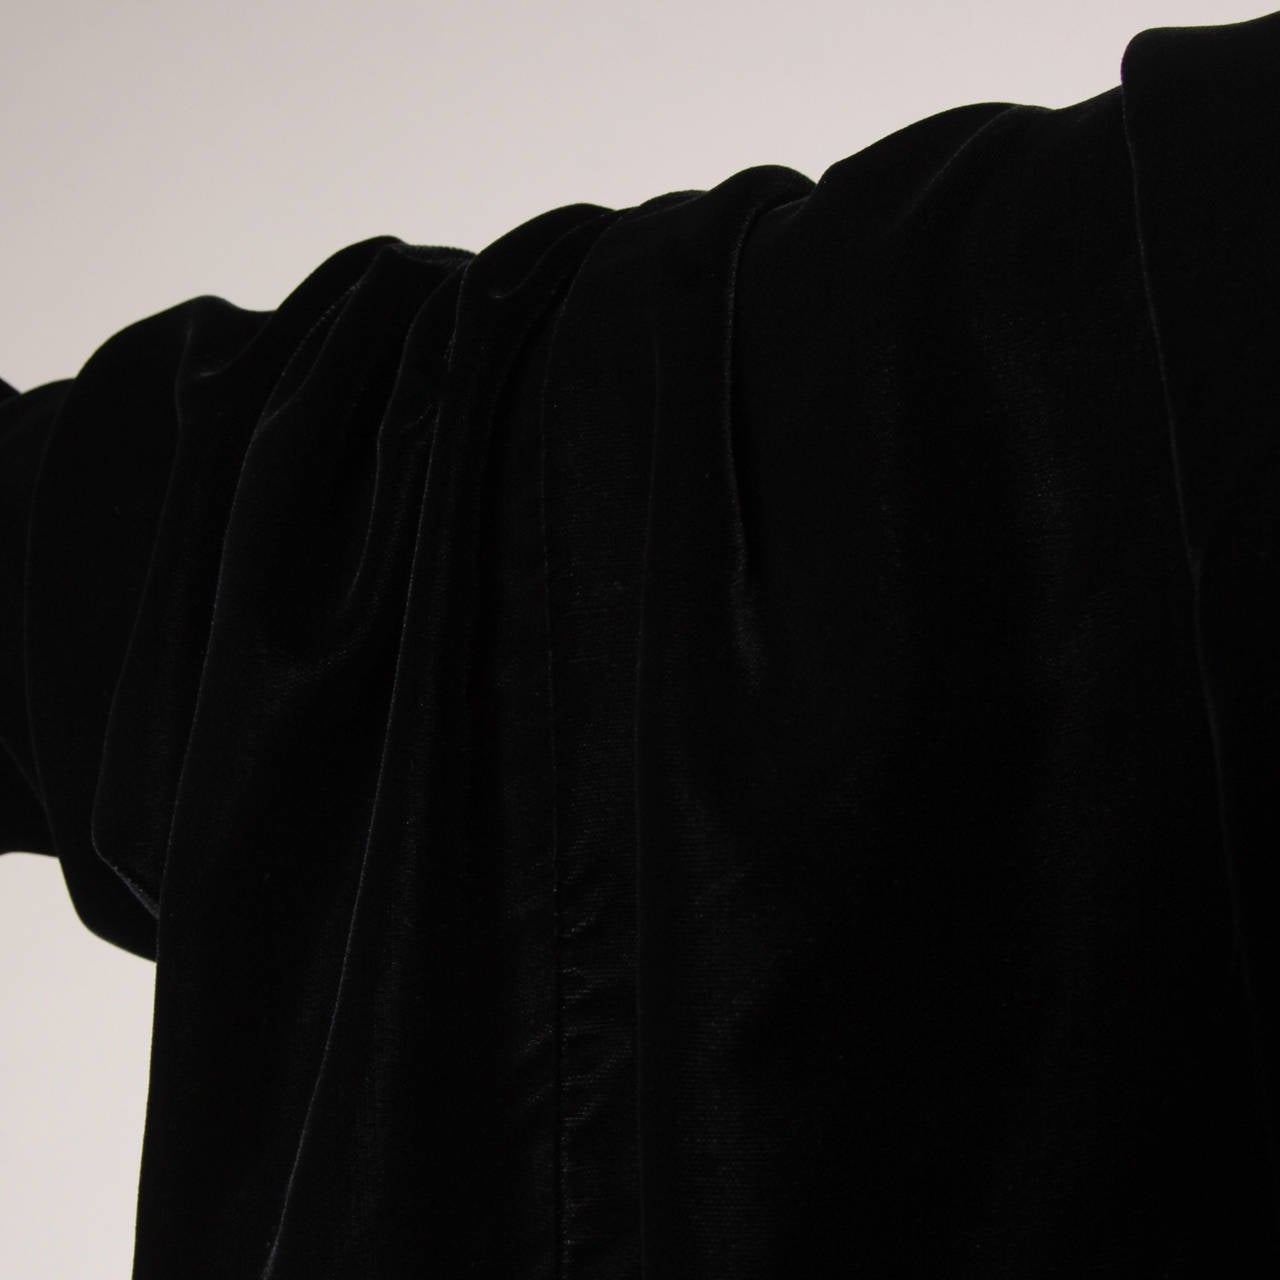 Avant garde black velvet batwing dress by Norma Kamali Omo. Giant draped sleeves and snap detail.

Details:

Fully Lined
Side Snap and Back Hook Closure
Marked Size: Not Marked
Estimated Size: Free
Color: Black
Fabric: Velvet
Label: Norma